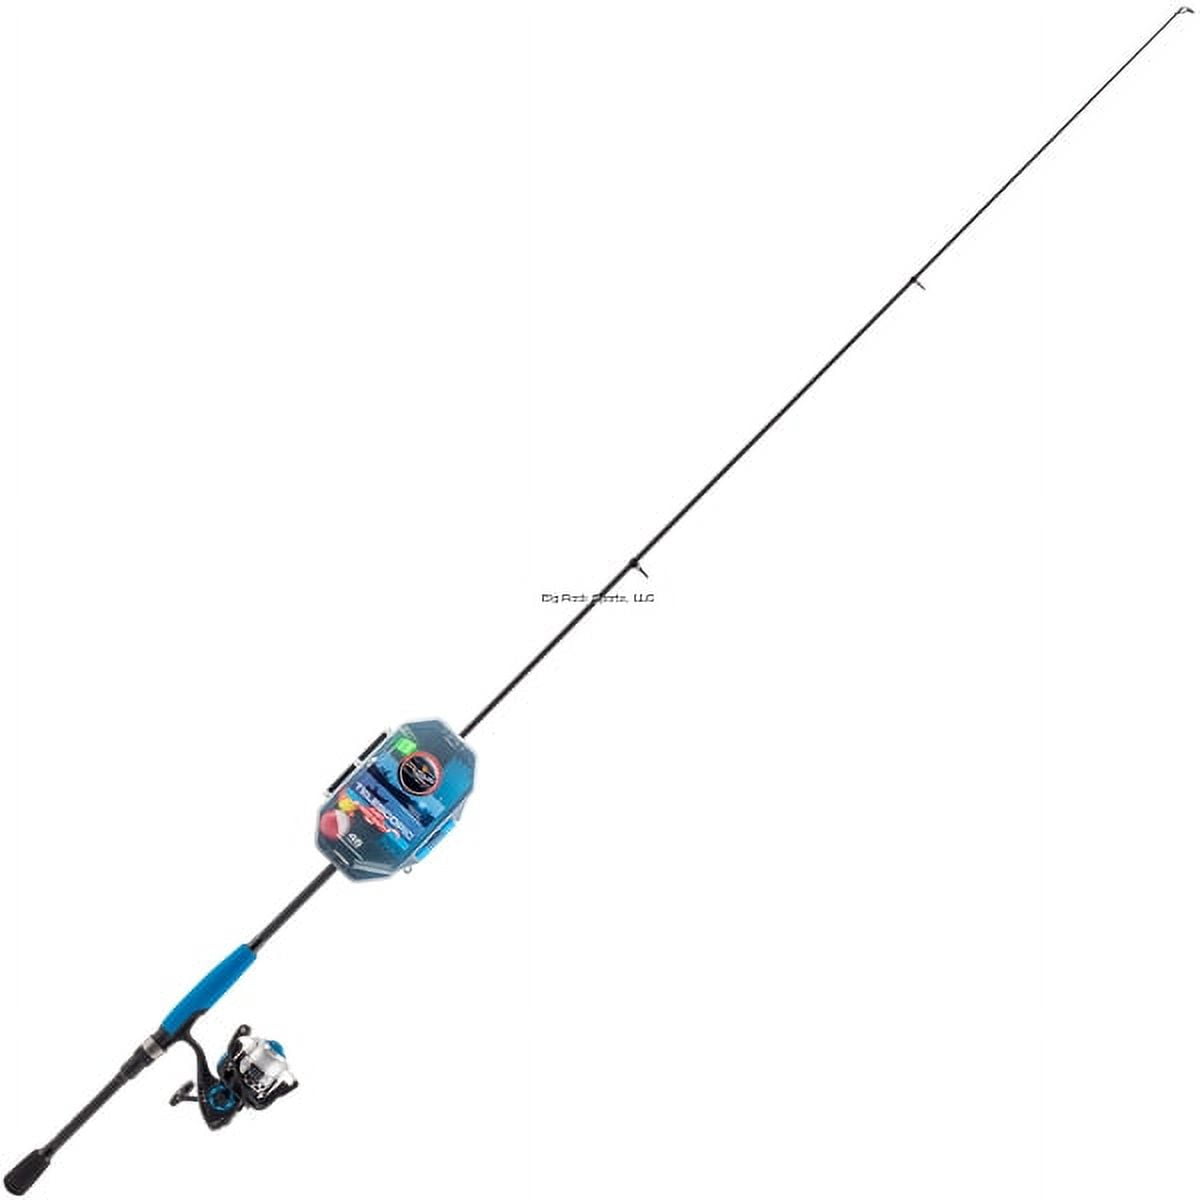 South Bend R2F Just Add Bait Telescopic Fishing Rod & Reel Spin